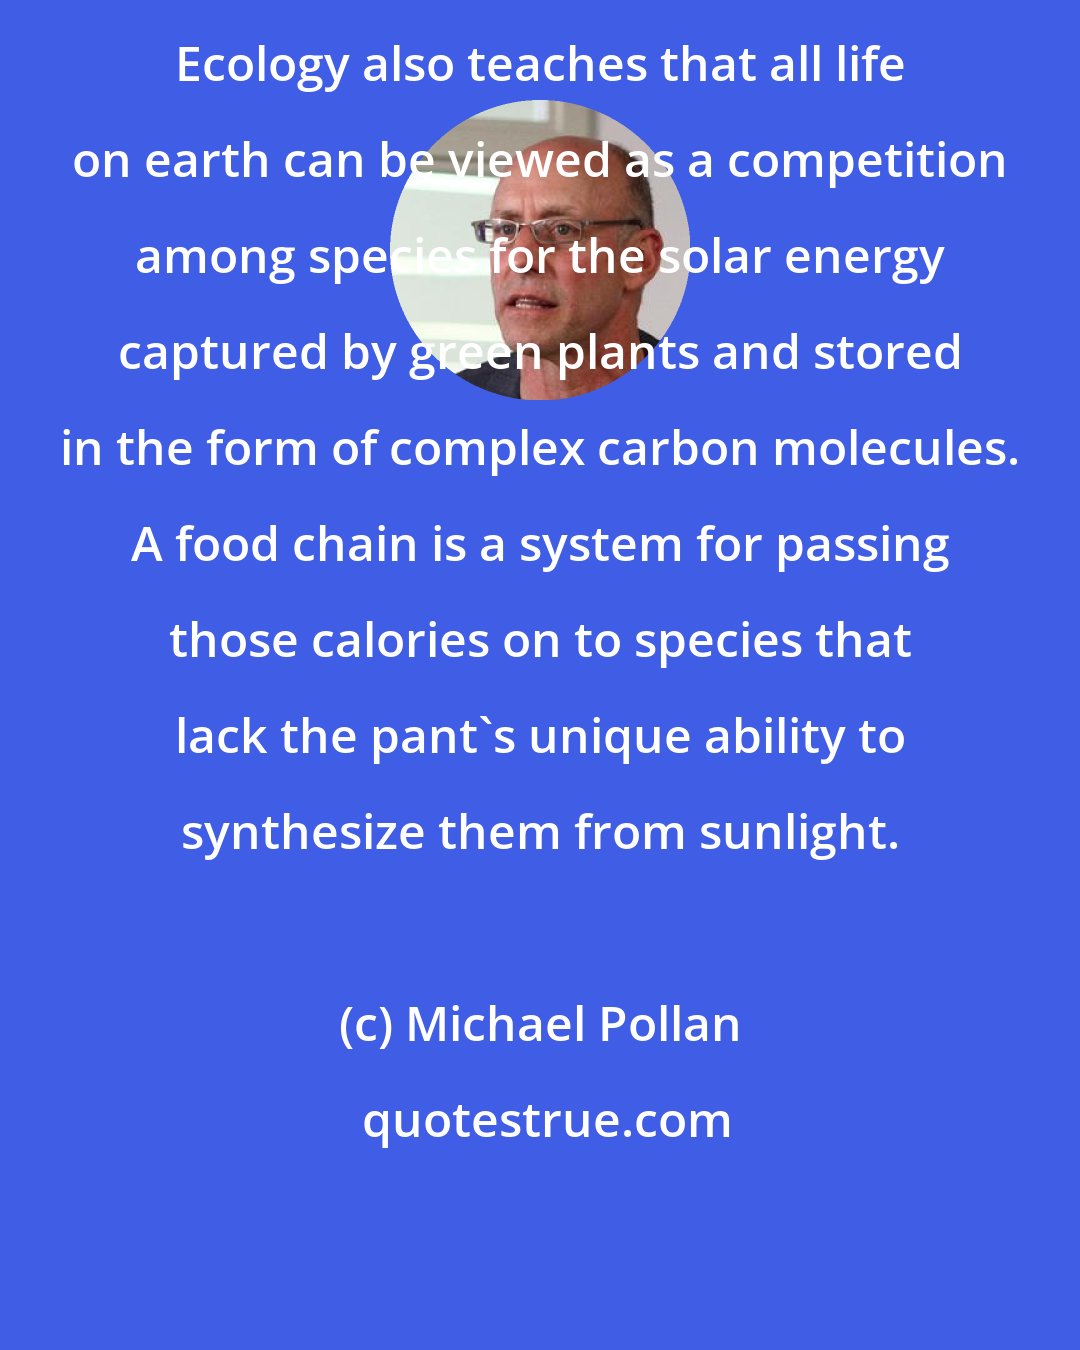 Michael Pollan: Ecology also teaches that all life on earth can be viewed as a competition among species for the solar energy captured by green plants and stored in the form of complex carbon molecules. A food chain is a system for passing those calories on to species that lack the pant's unique ability to synthesize them from sunlight.